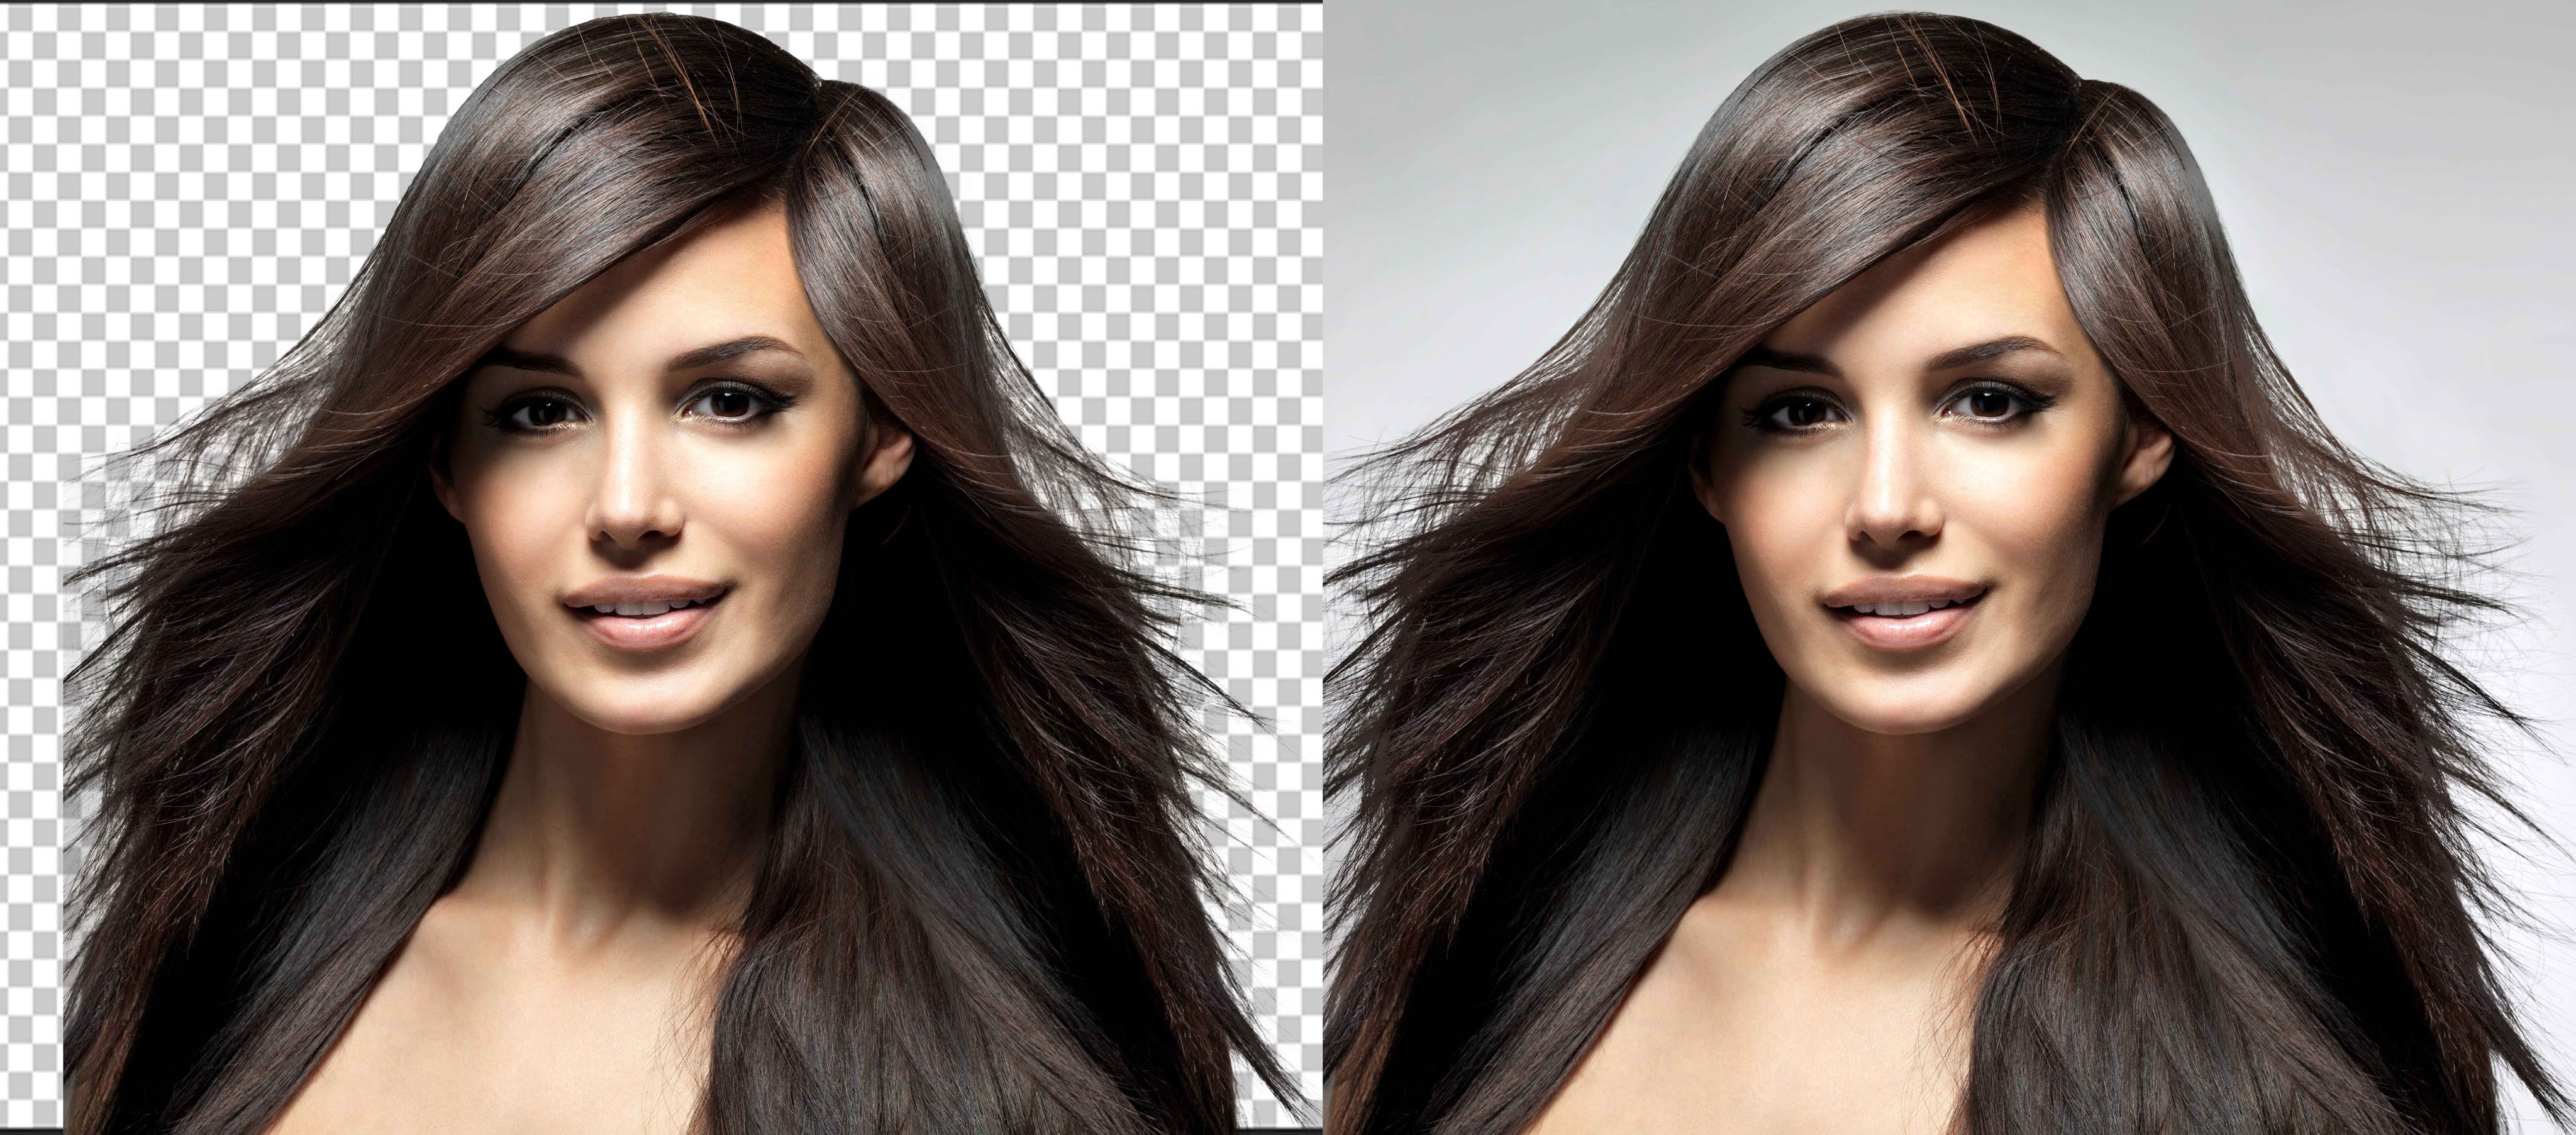 remove background photoshop extension free download